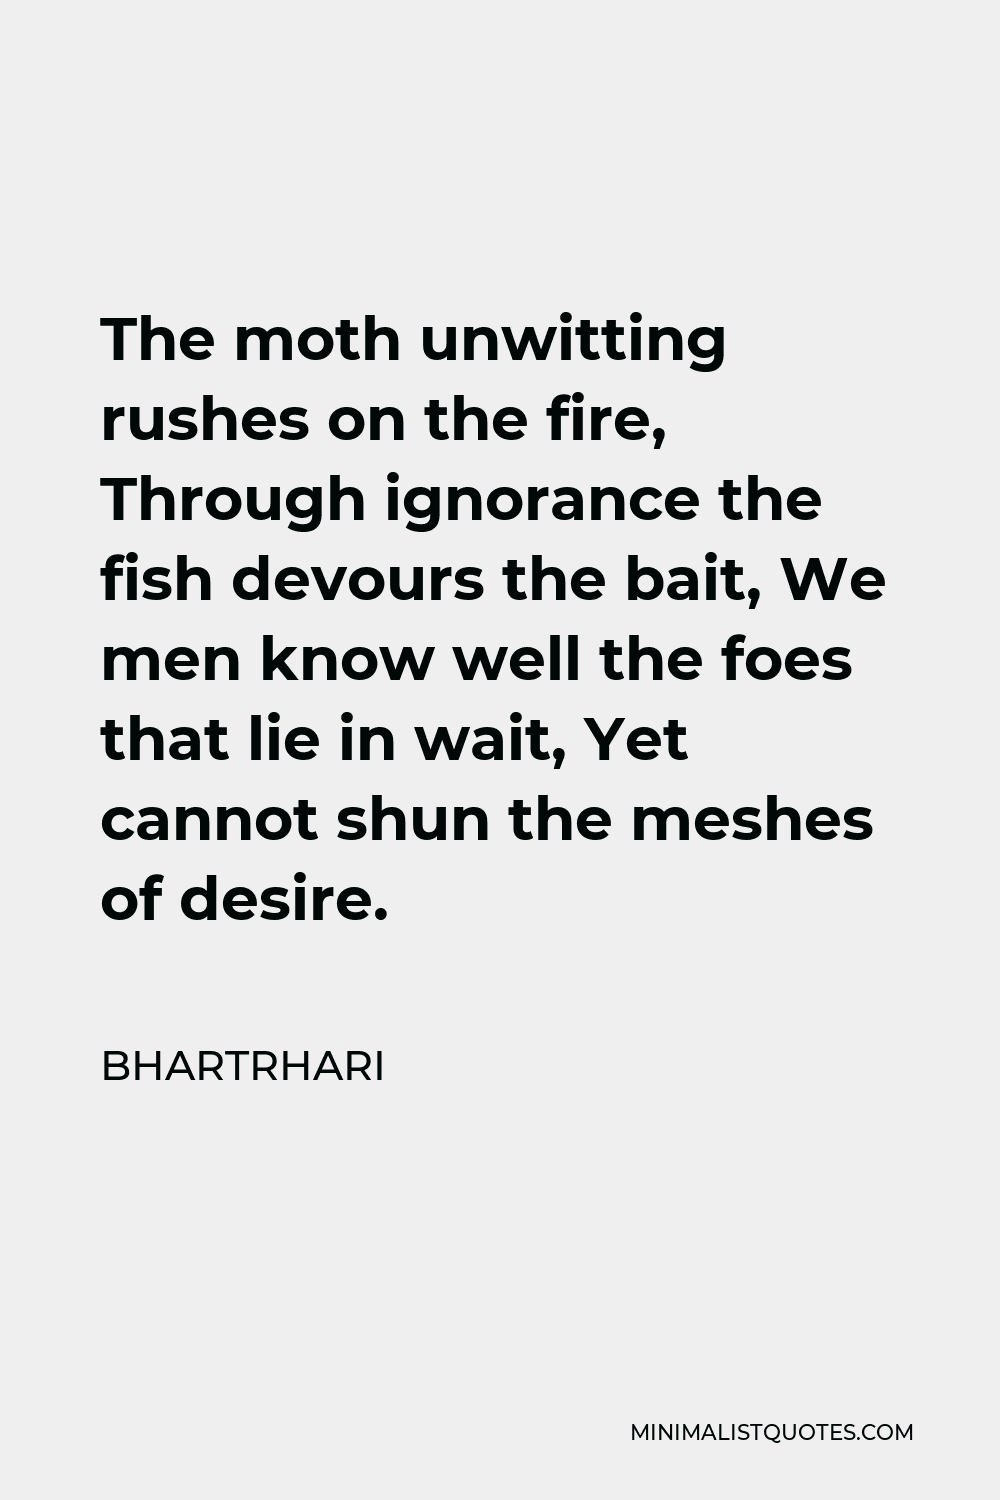 Bhartrhari Quote - The moth unwitting rushes on the fire, Through ignorance the fish devours the bait, We men know well the foes that lie in wait, Yet cannot shun the meshes of desire.